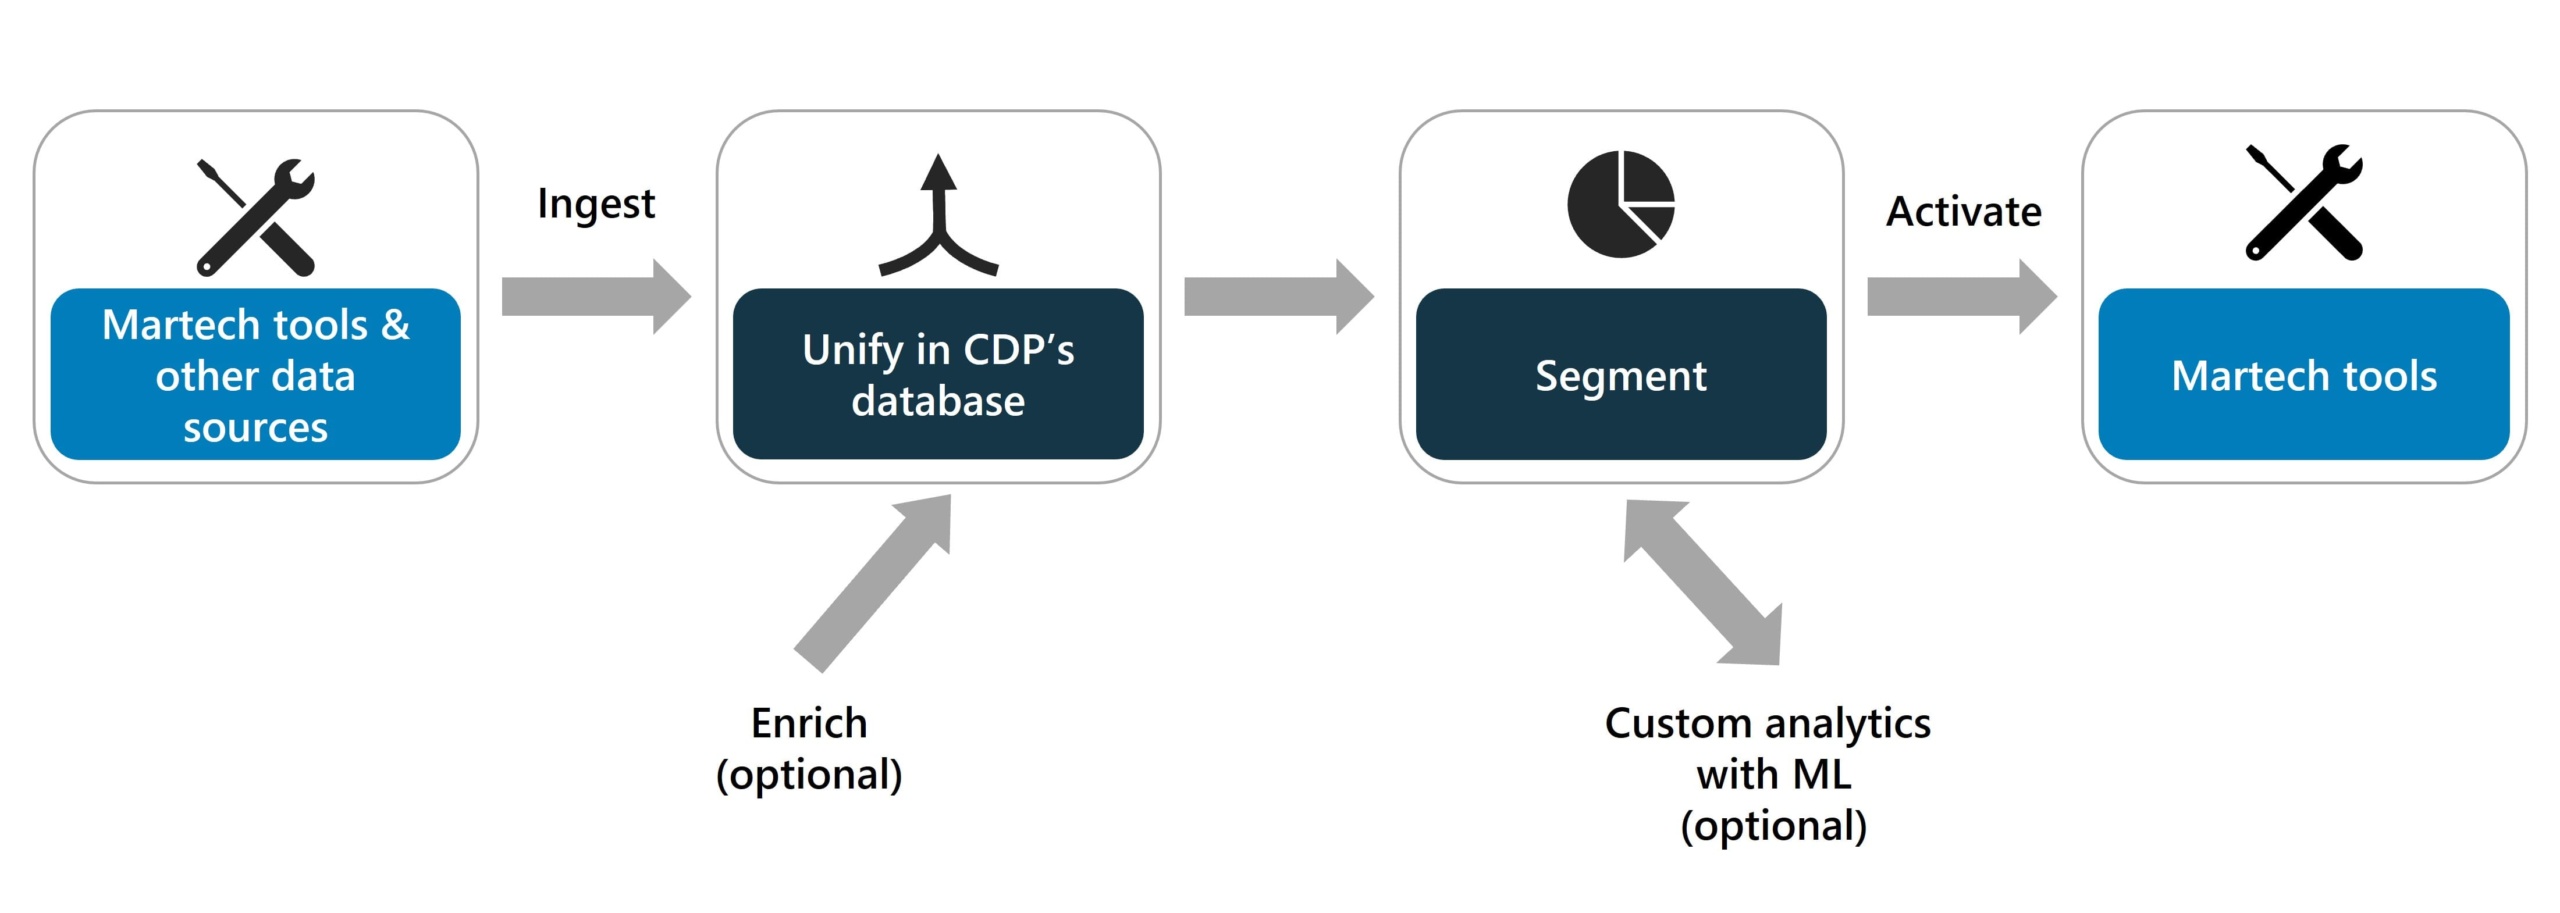 CDP simplified architecture diagram